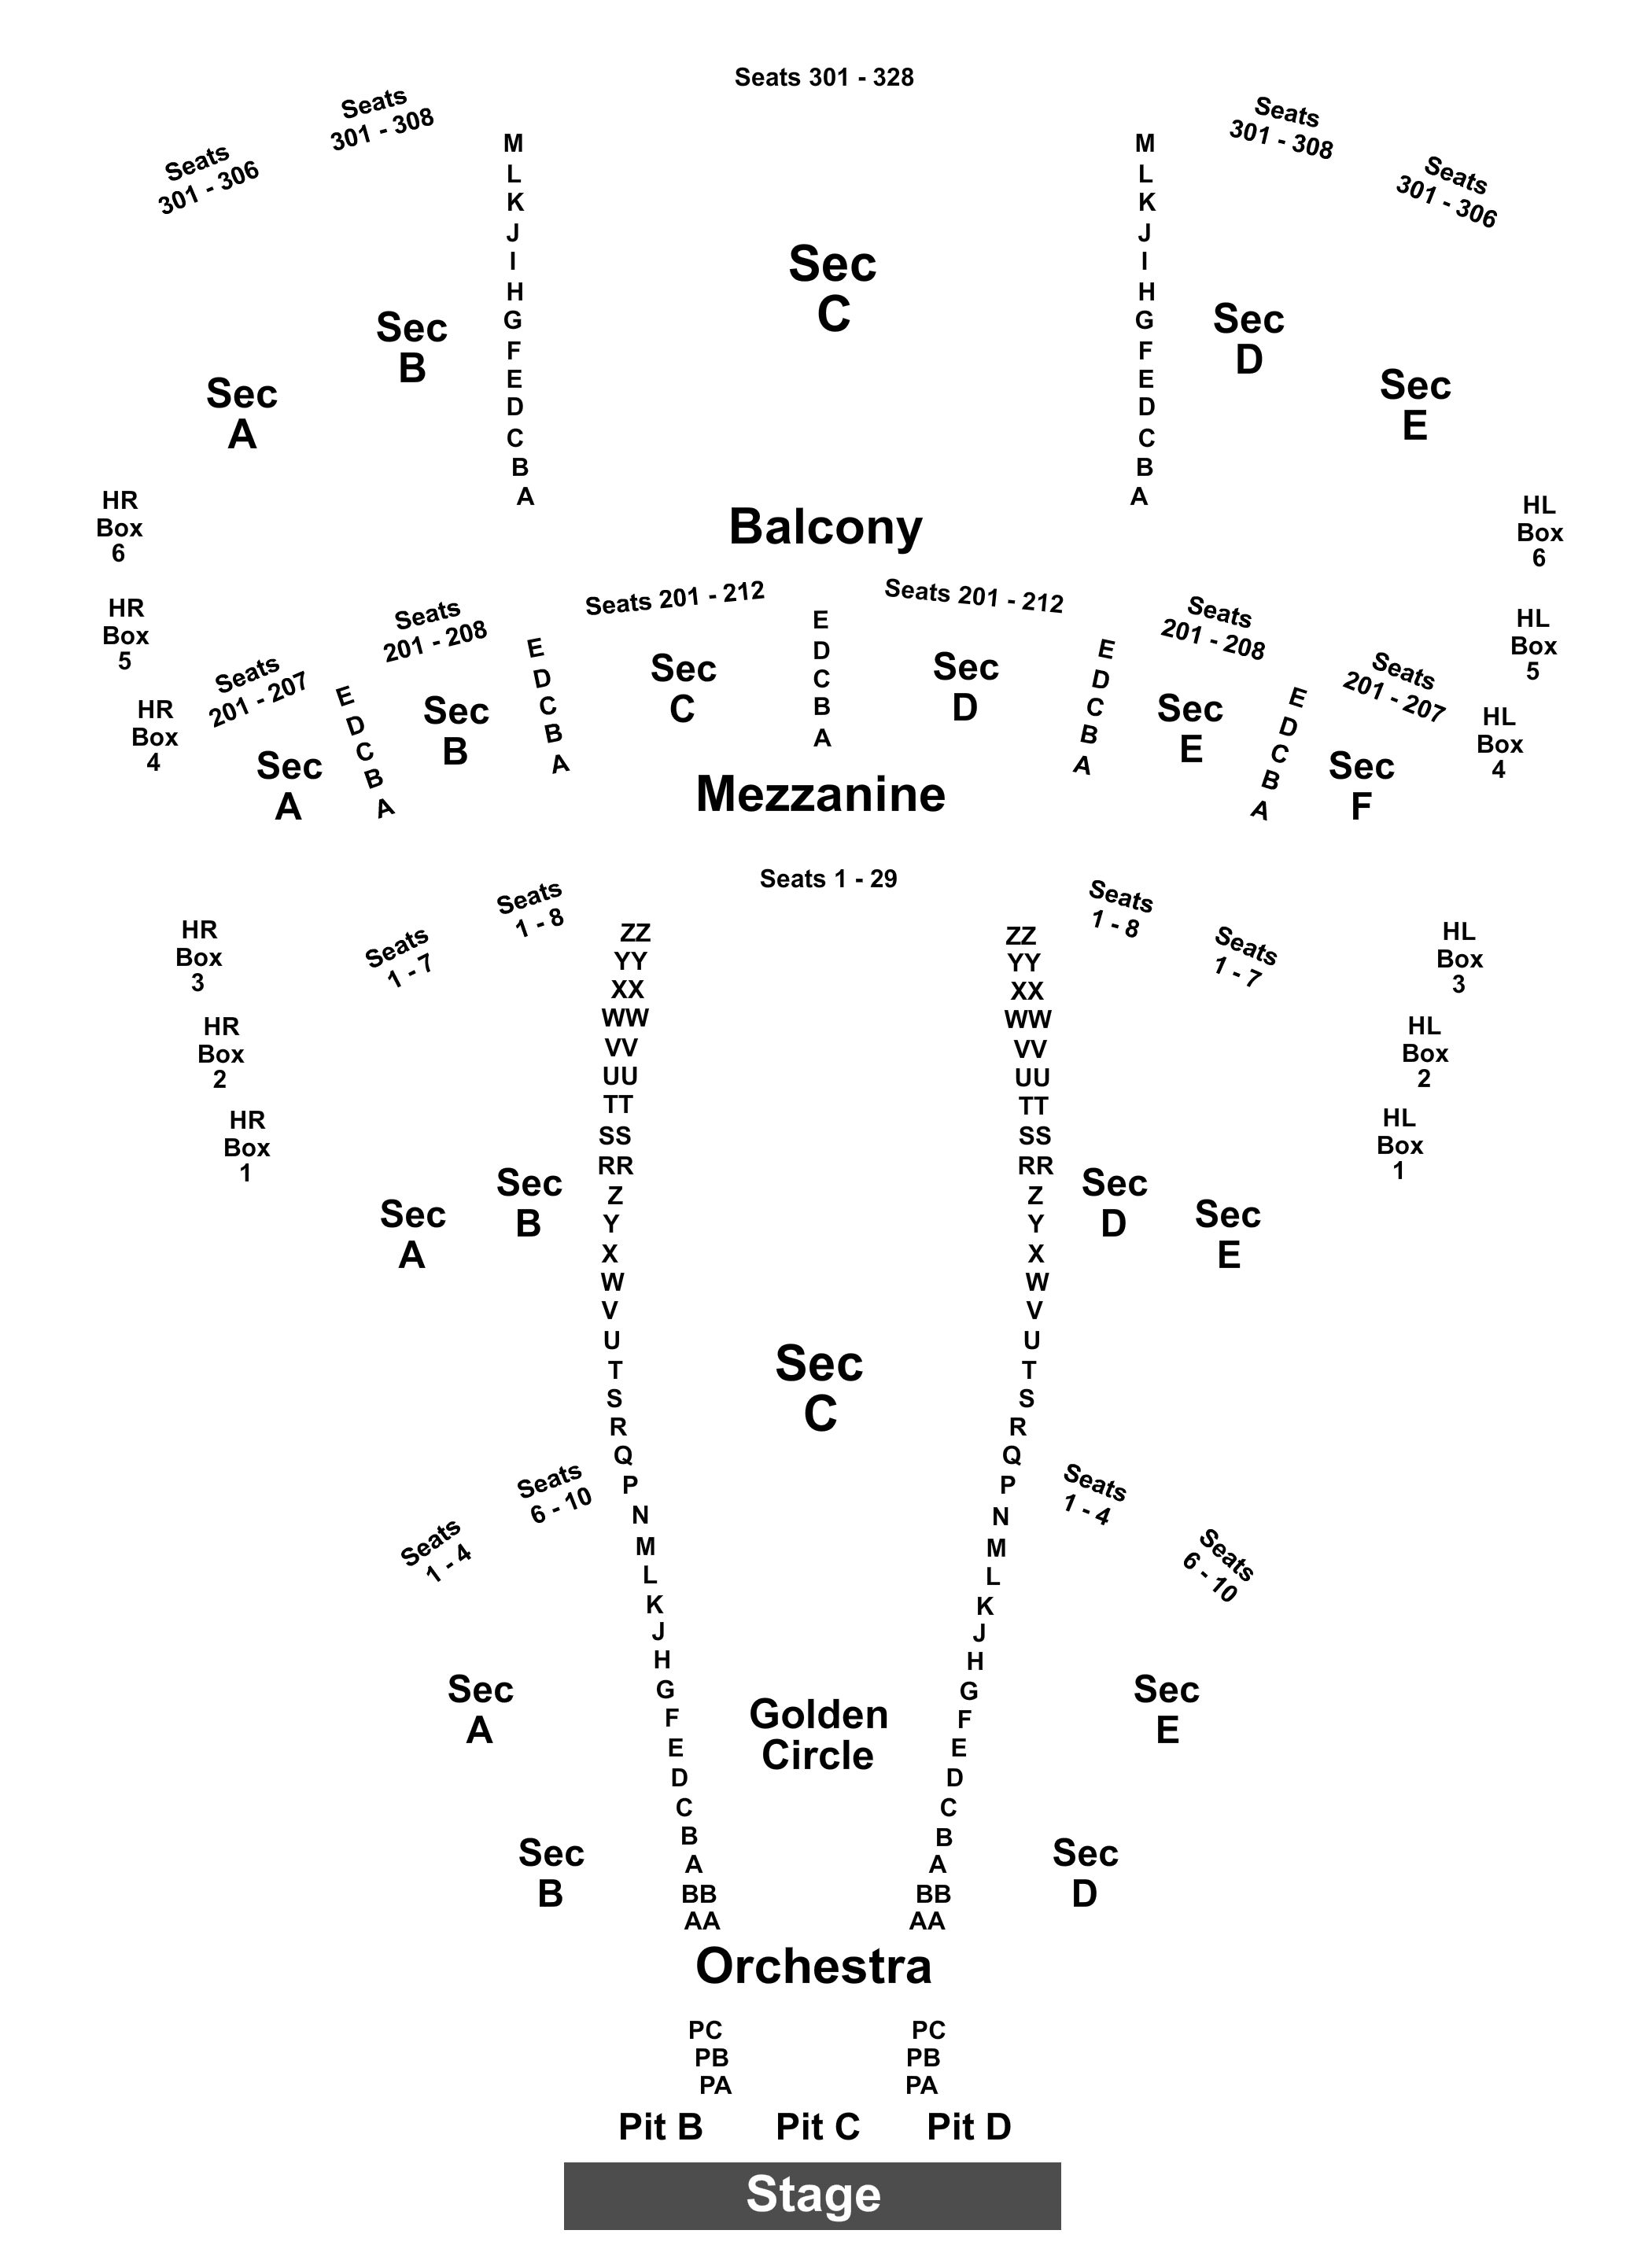 Buell Theater Seating Chart